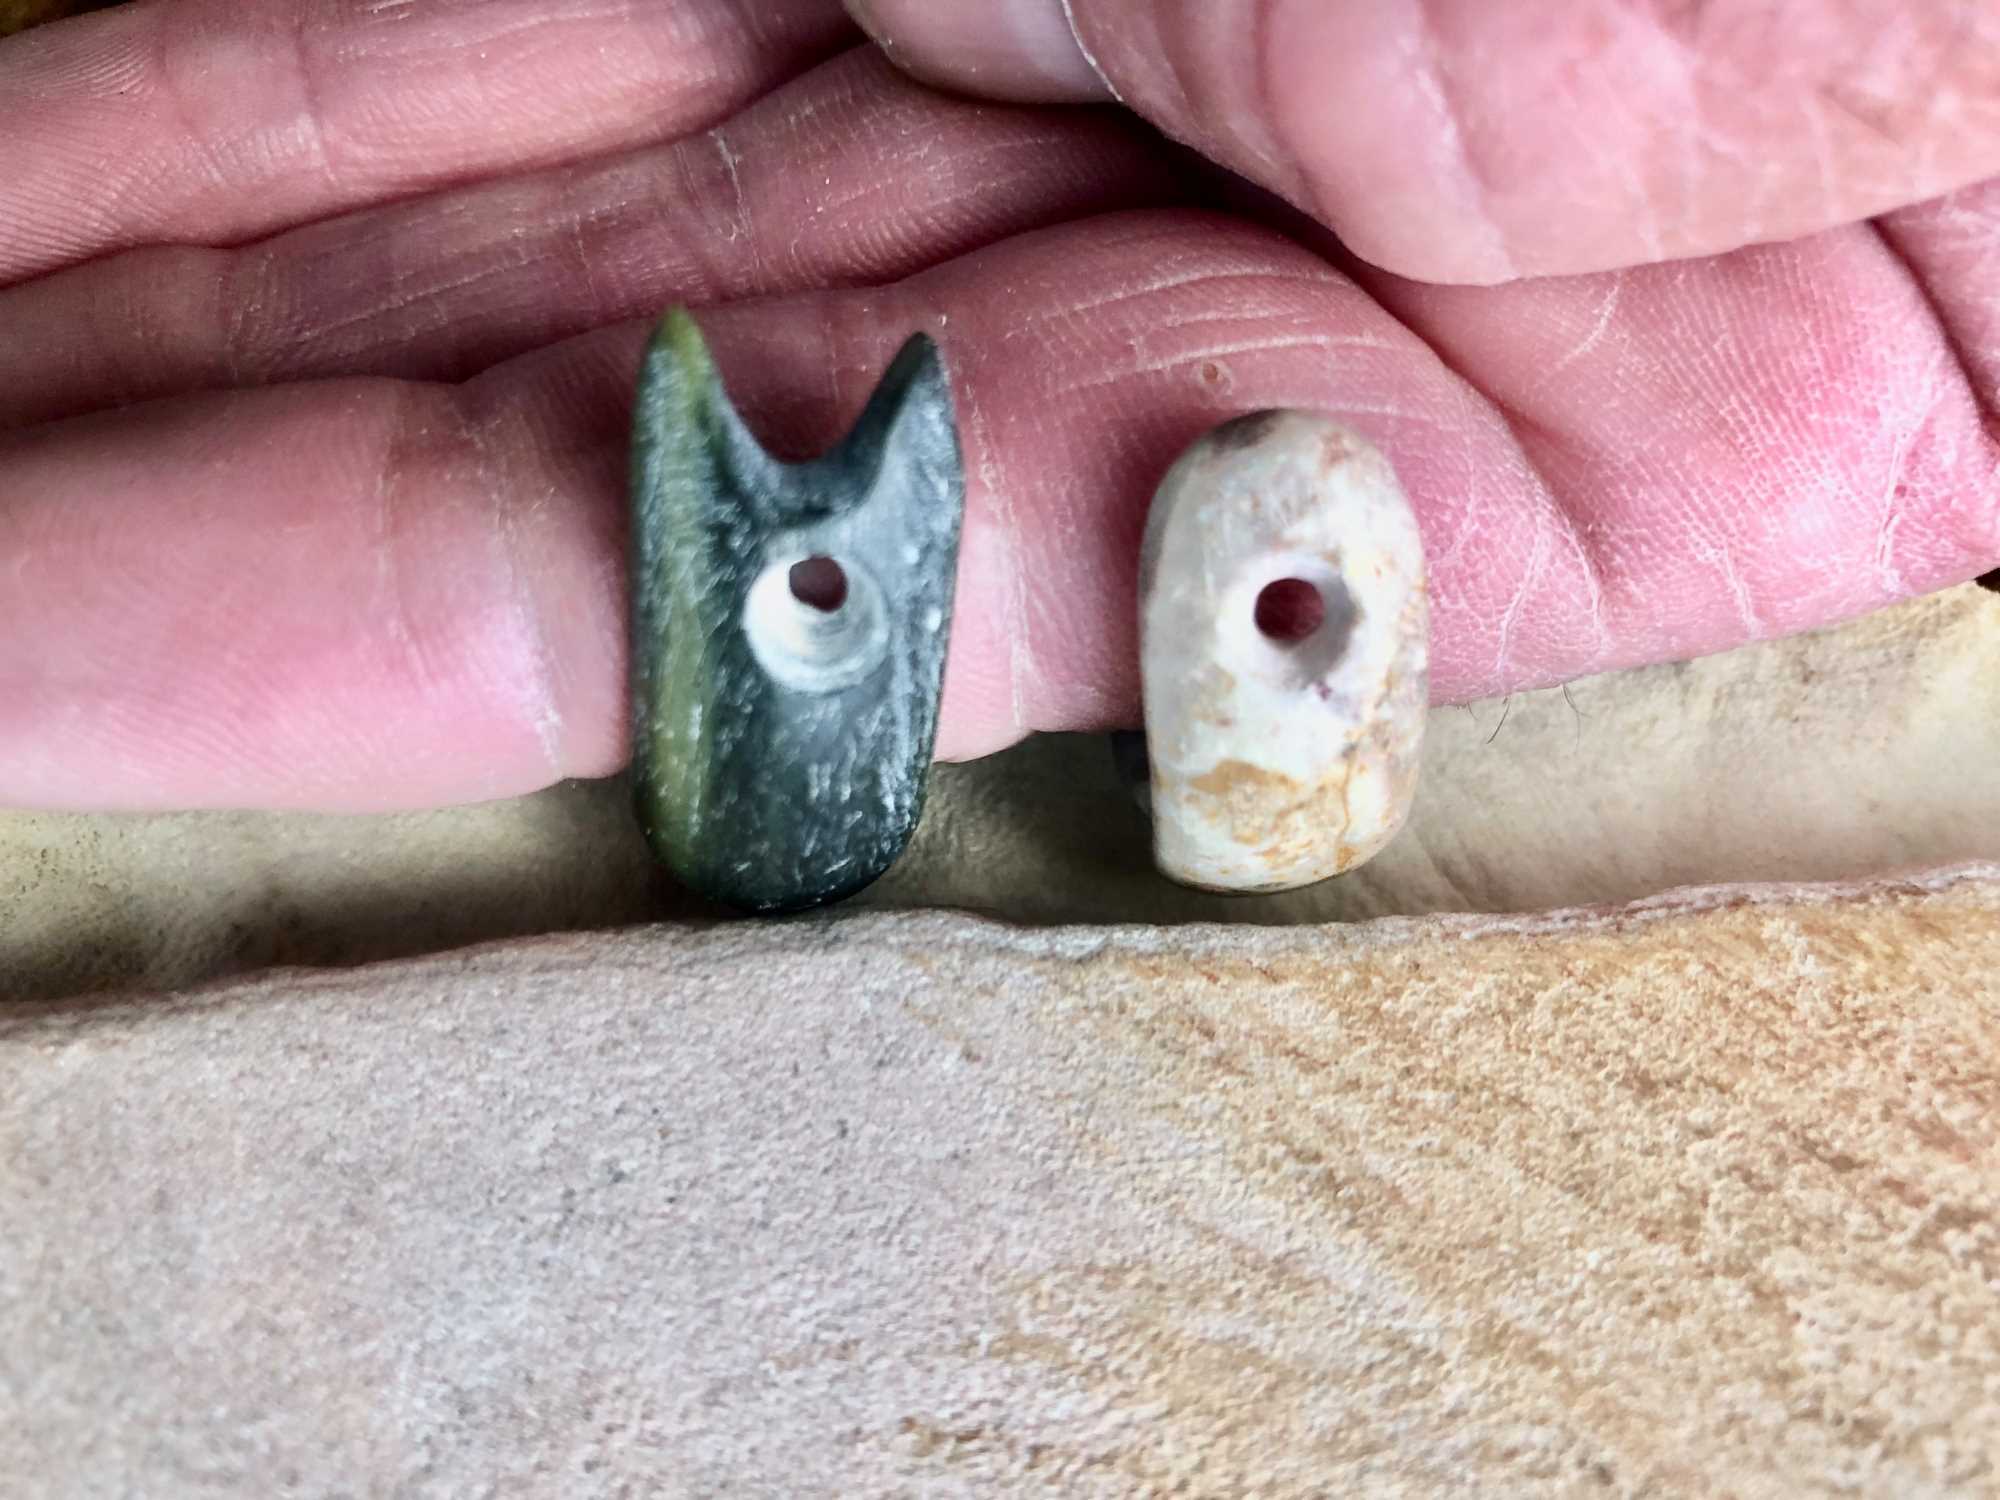 This shows the two styles of stone atlatl loops found in Sonora, northwest Mexico. Both are replicas. The notched example at left is known as “Sonoran style.” This style is known from the La Playa site and from an example found in Soyopa, Sonora. The two stone loops found in the Tucson Basin represent each style.